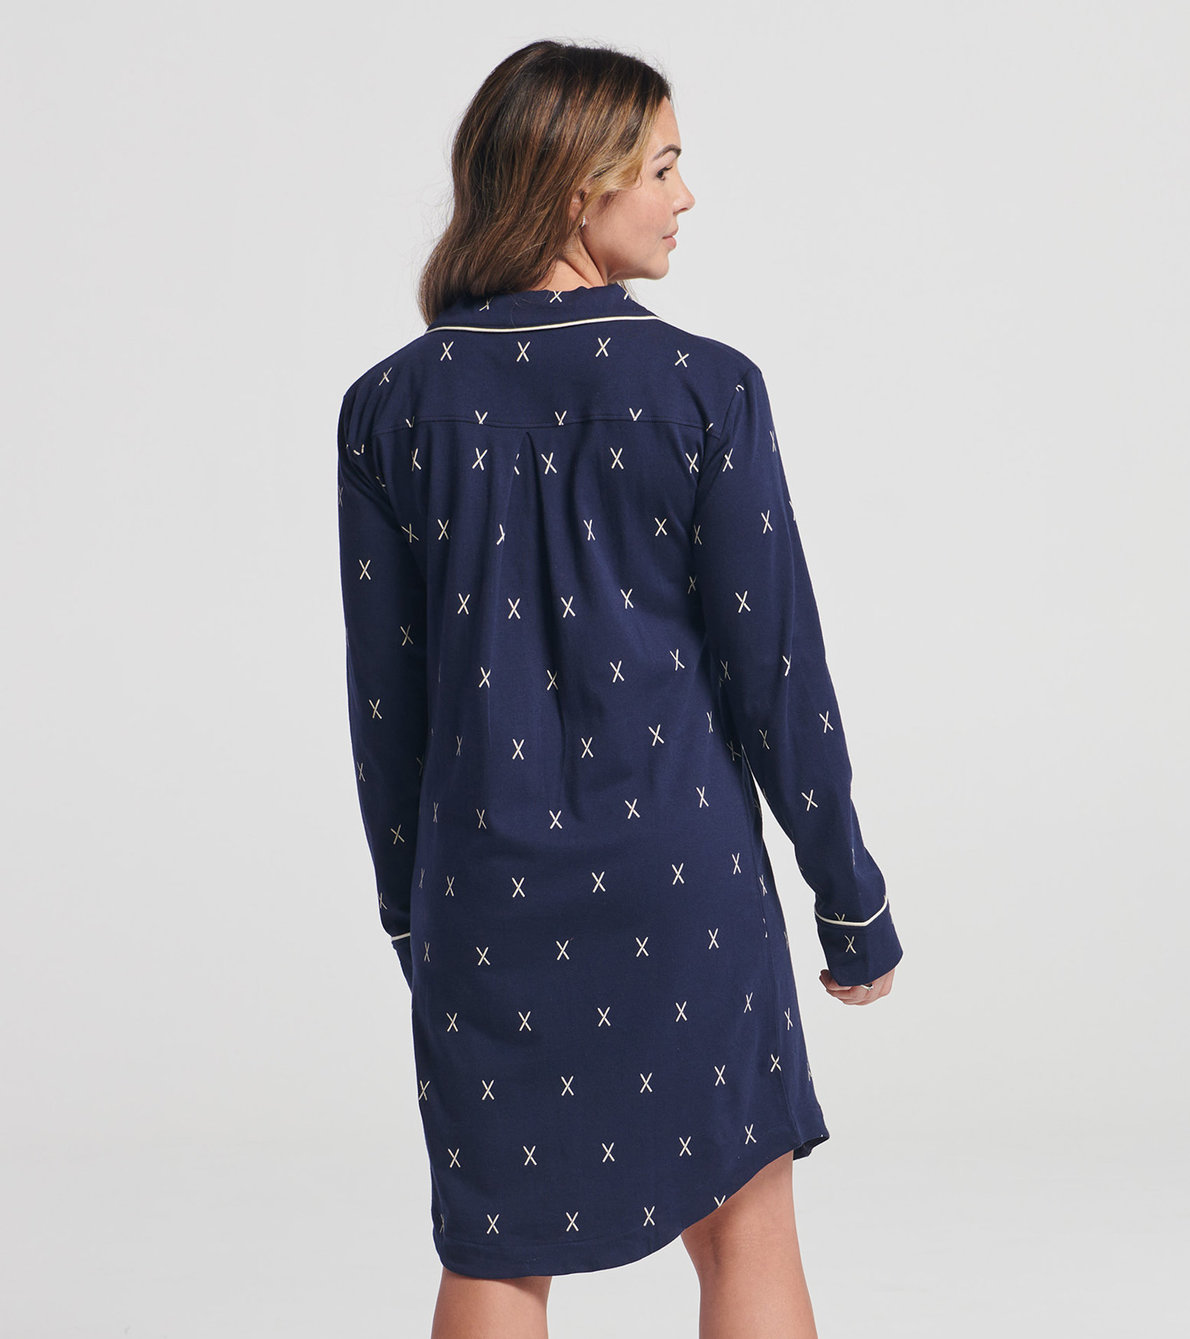 View larger image of Women's Navy Ski Stretch Jersey Nightgown